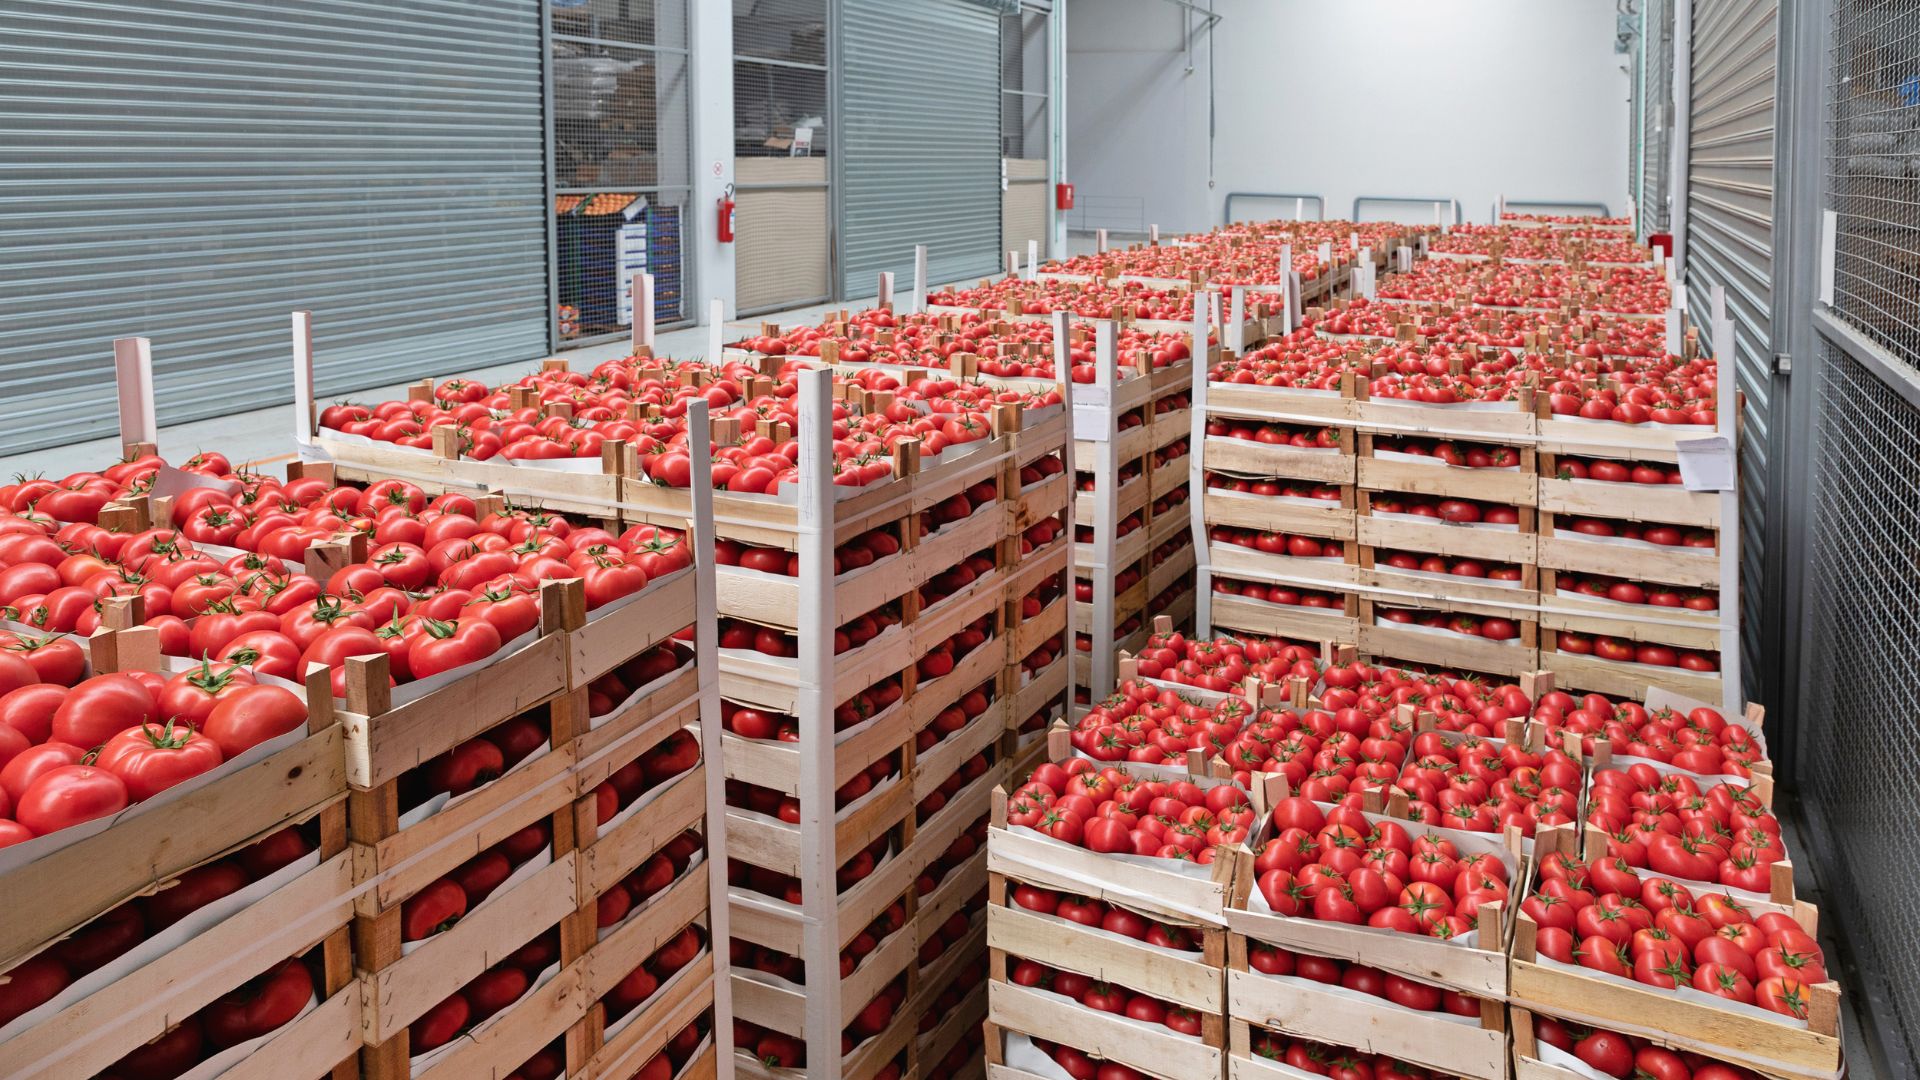 wholesale distributors farm warehouse filled with crates of tomatoes ready to be sent to suppliers